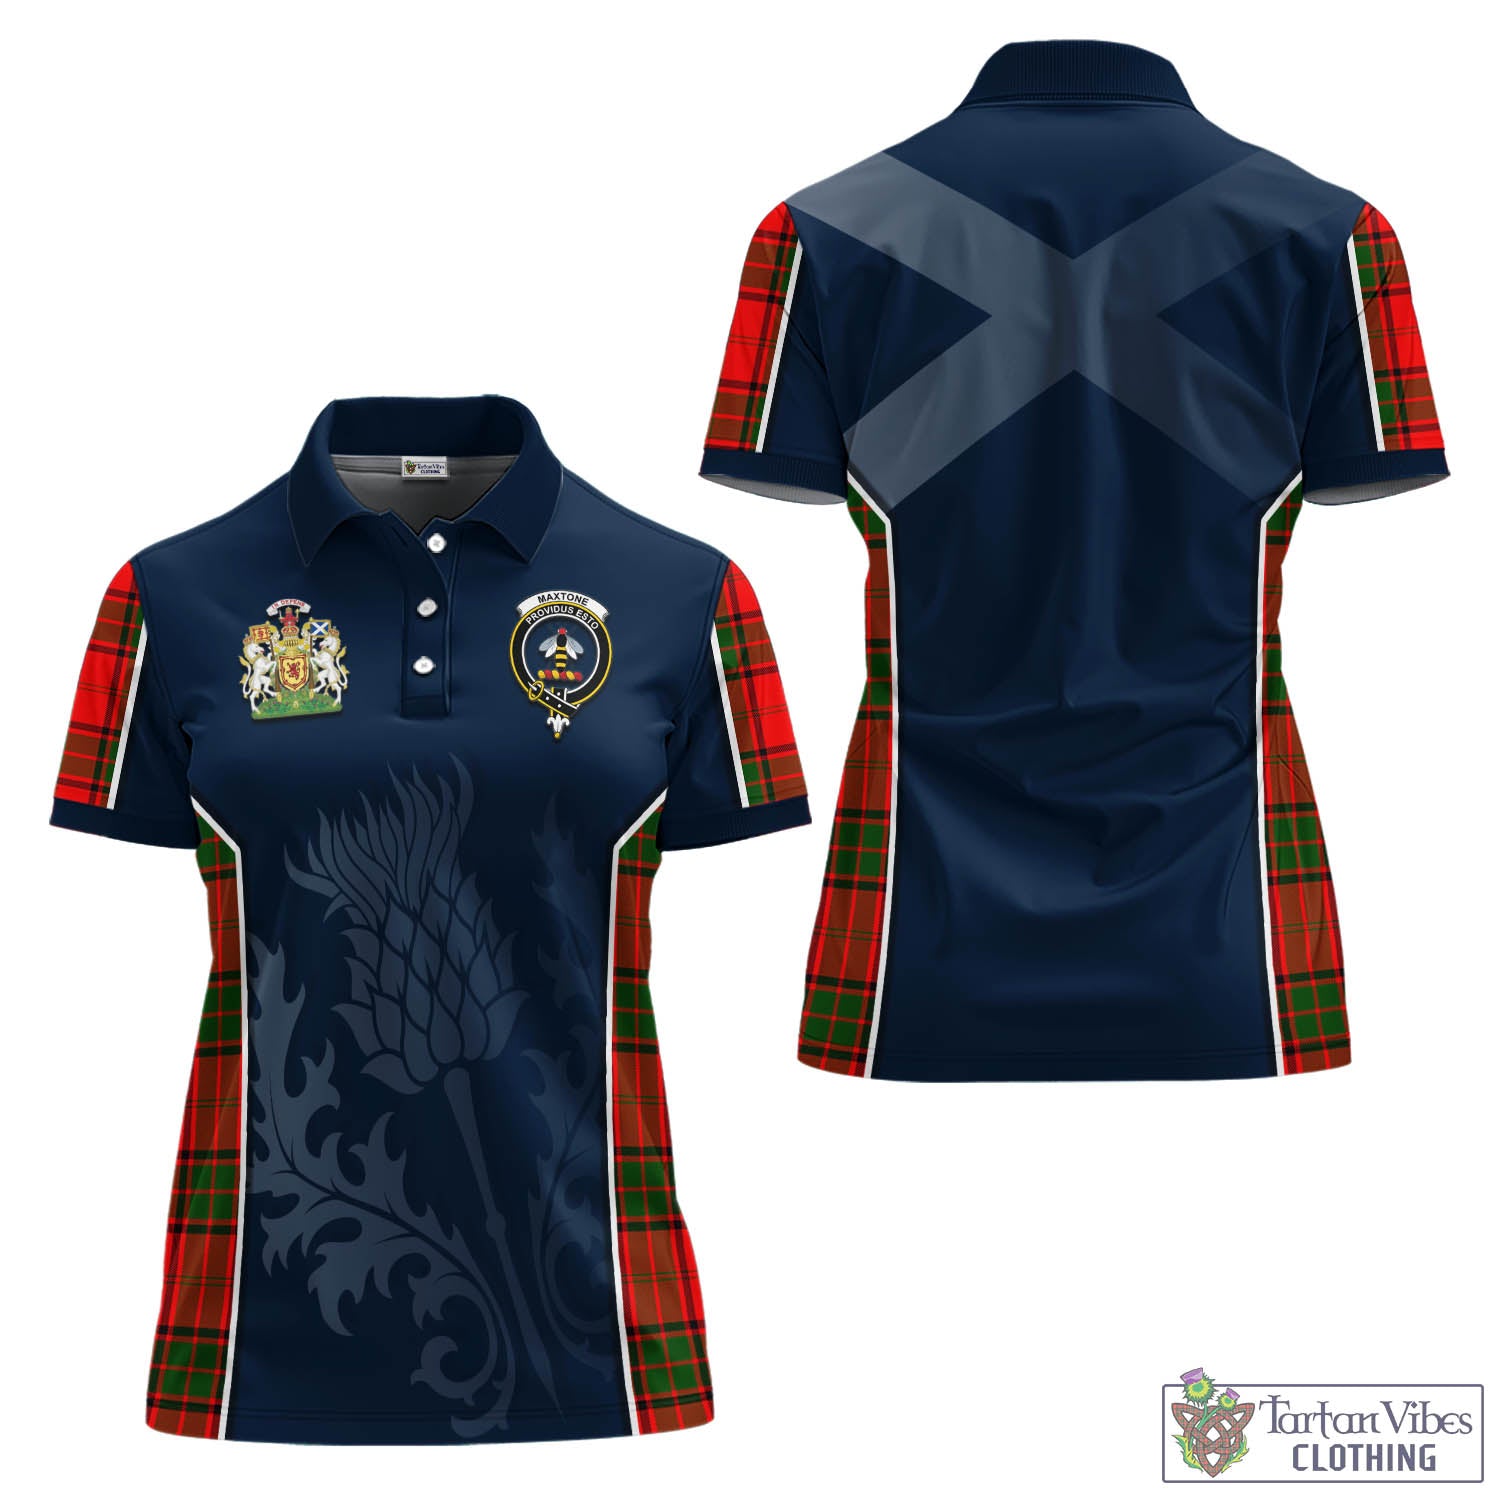 Tartan Vibes Clothing Maxtone Tartan Women's Polo Shirt with Family Crest and Scottish Thistle Vibes Sport Style